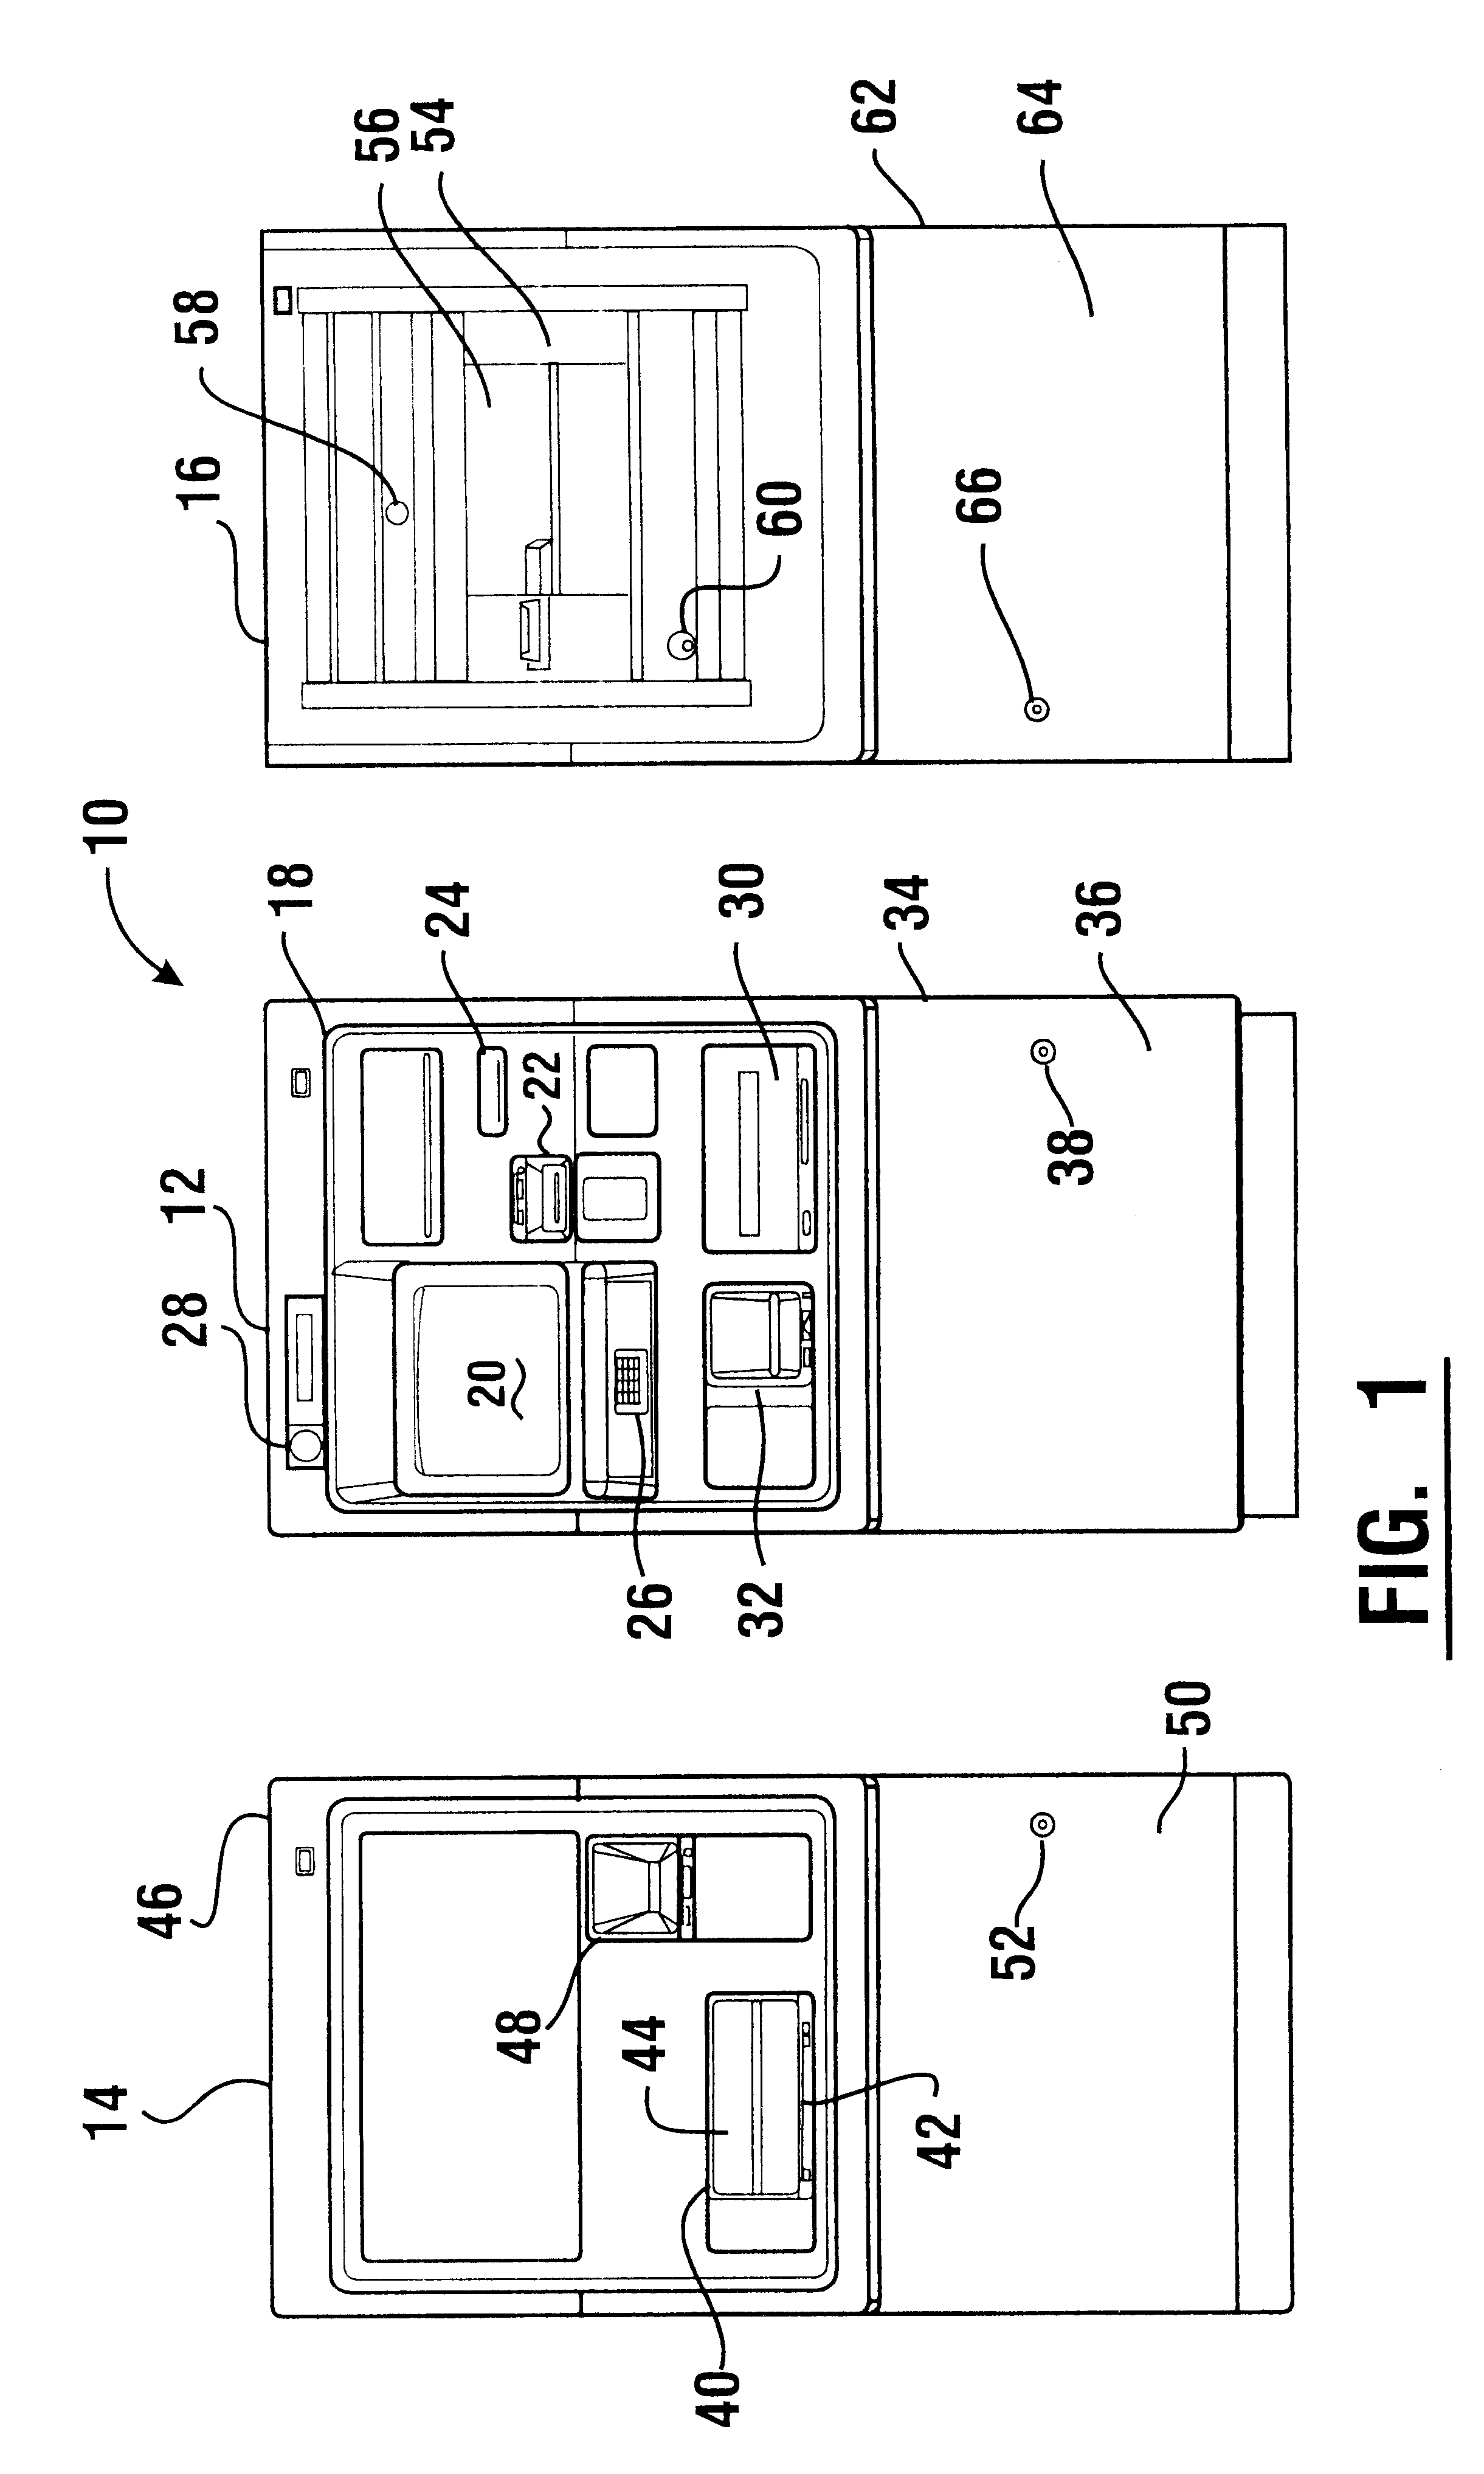 Automated merchant banking apparatus and method